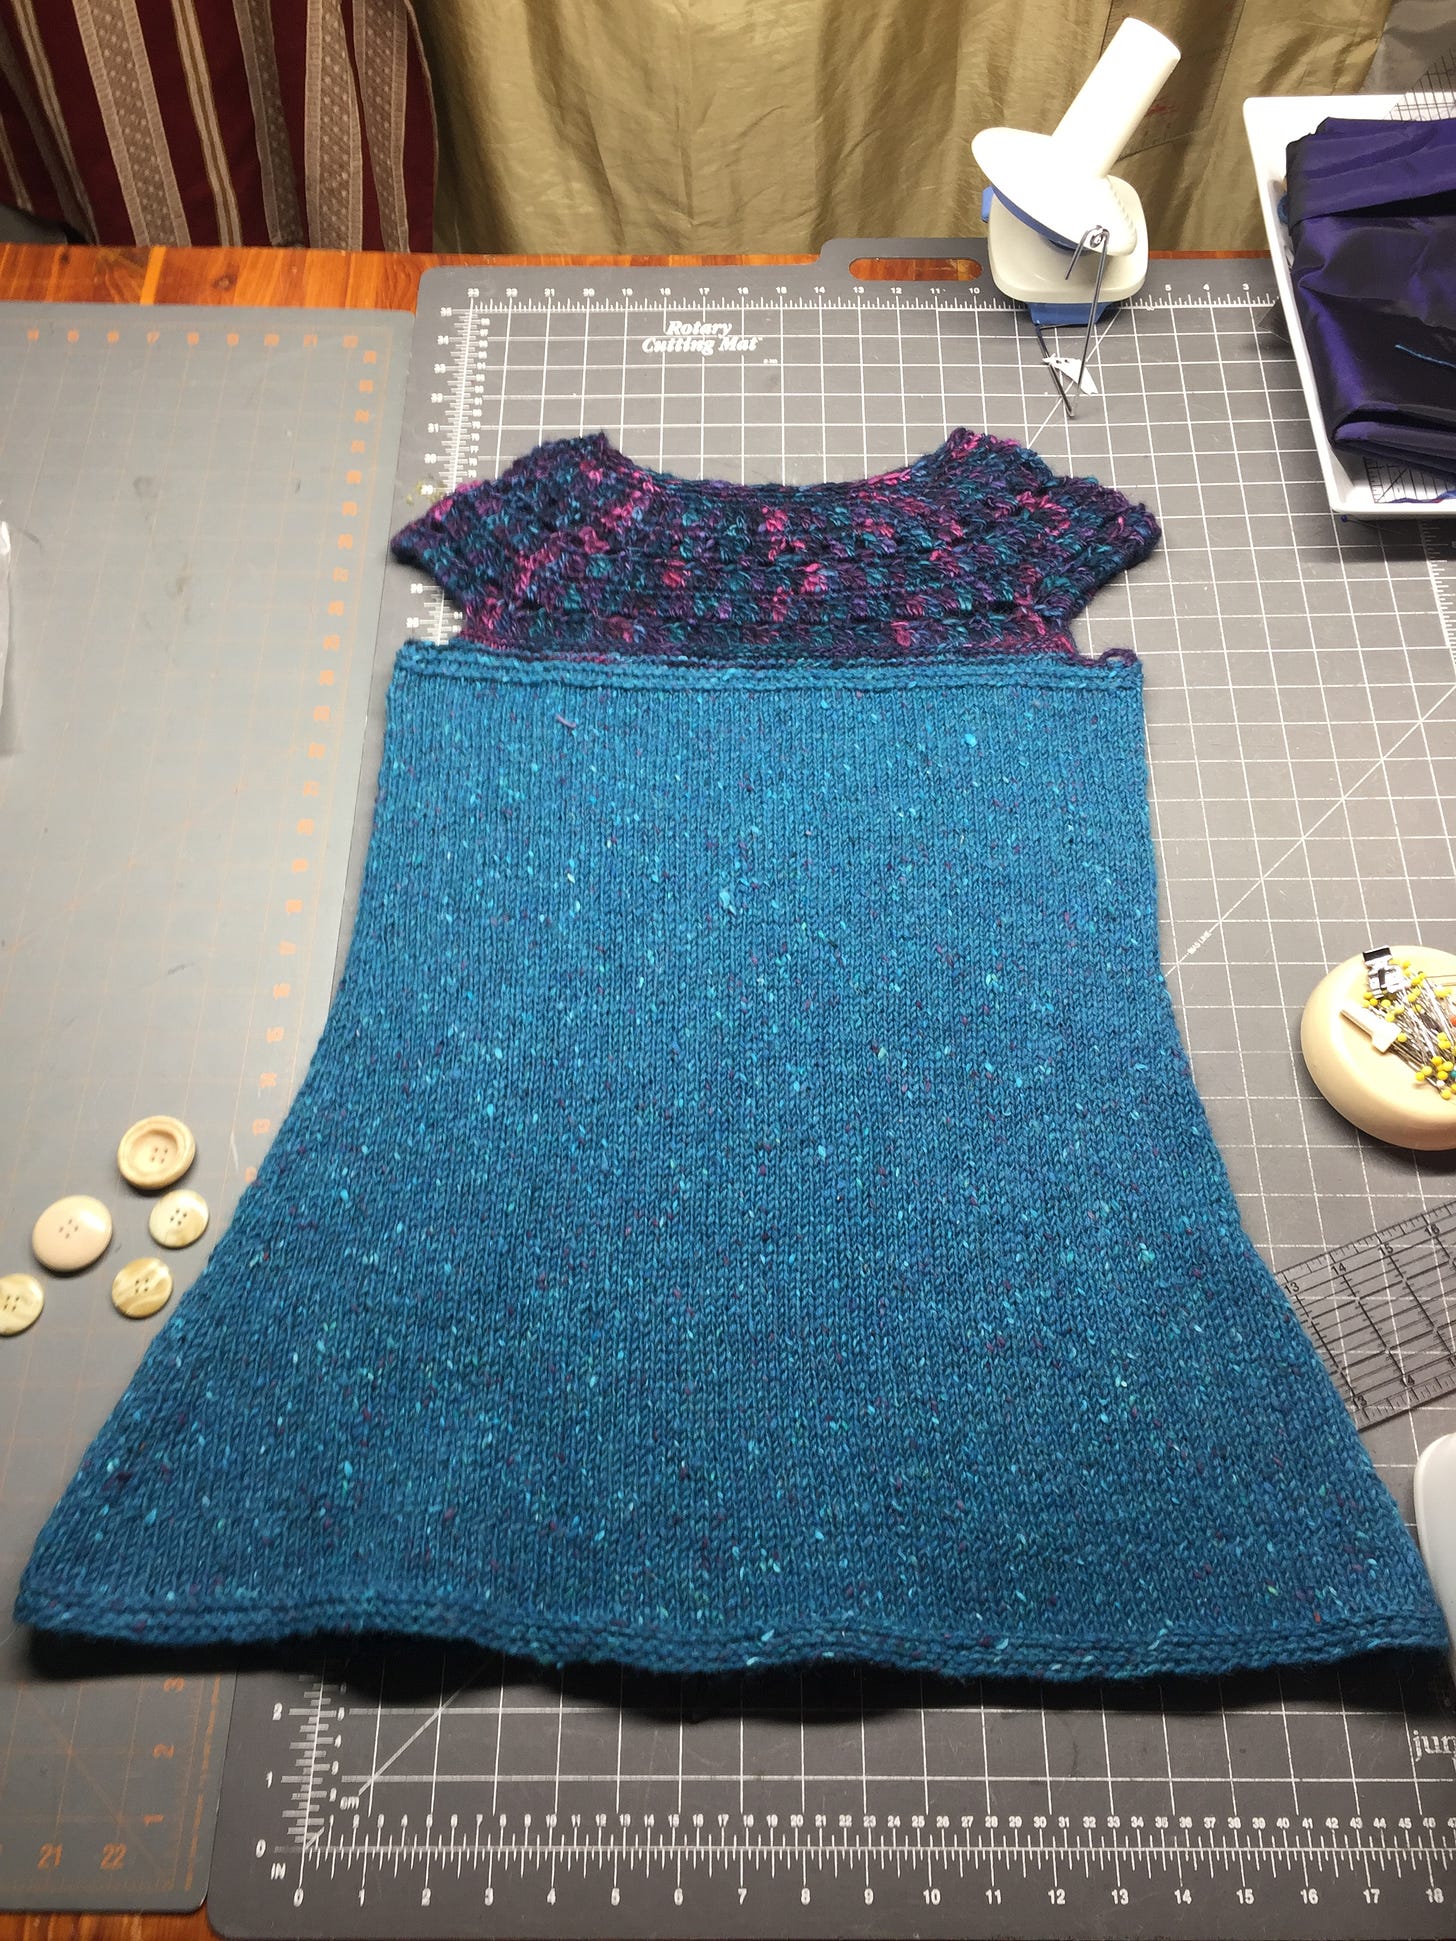 A handknitted teal sweater with a dark colored yoke. 